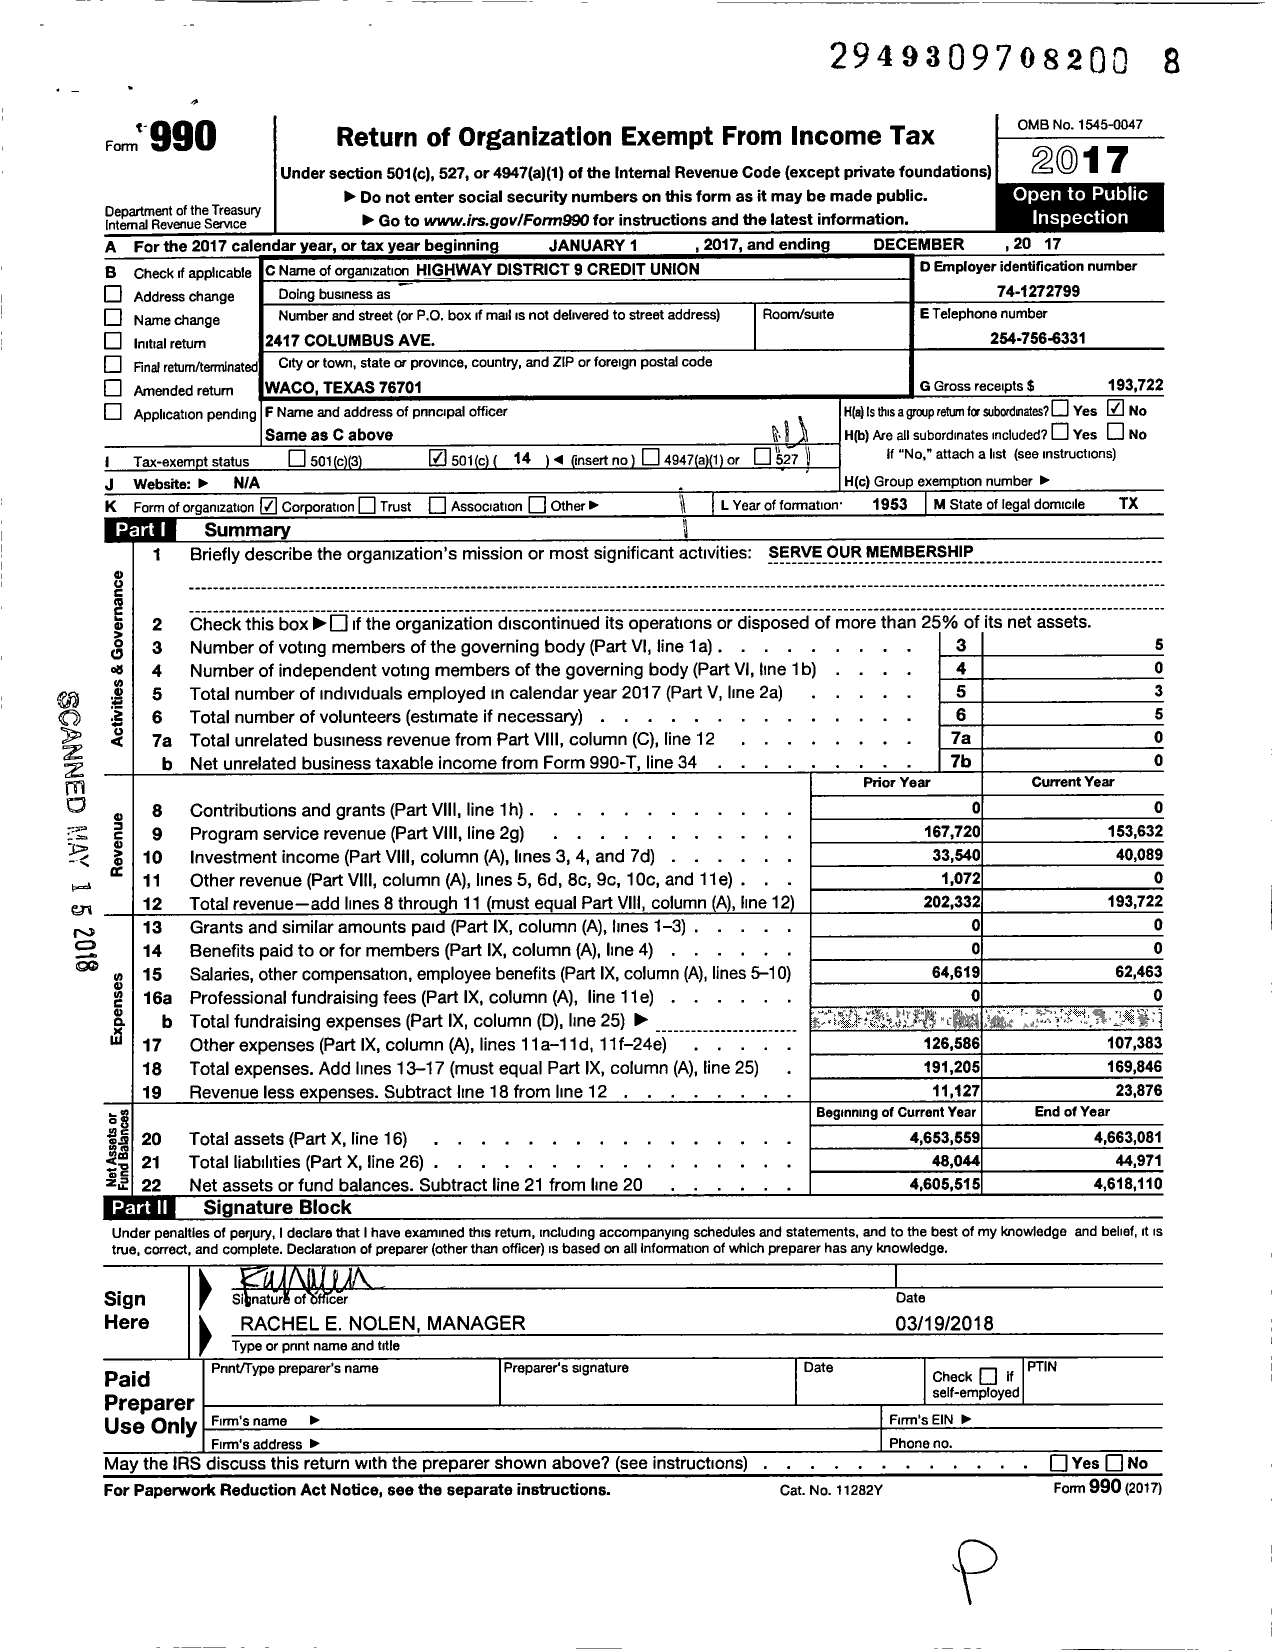 Image of first page of 2017 Form 990O for Hwy District 9 Credit Union